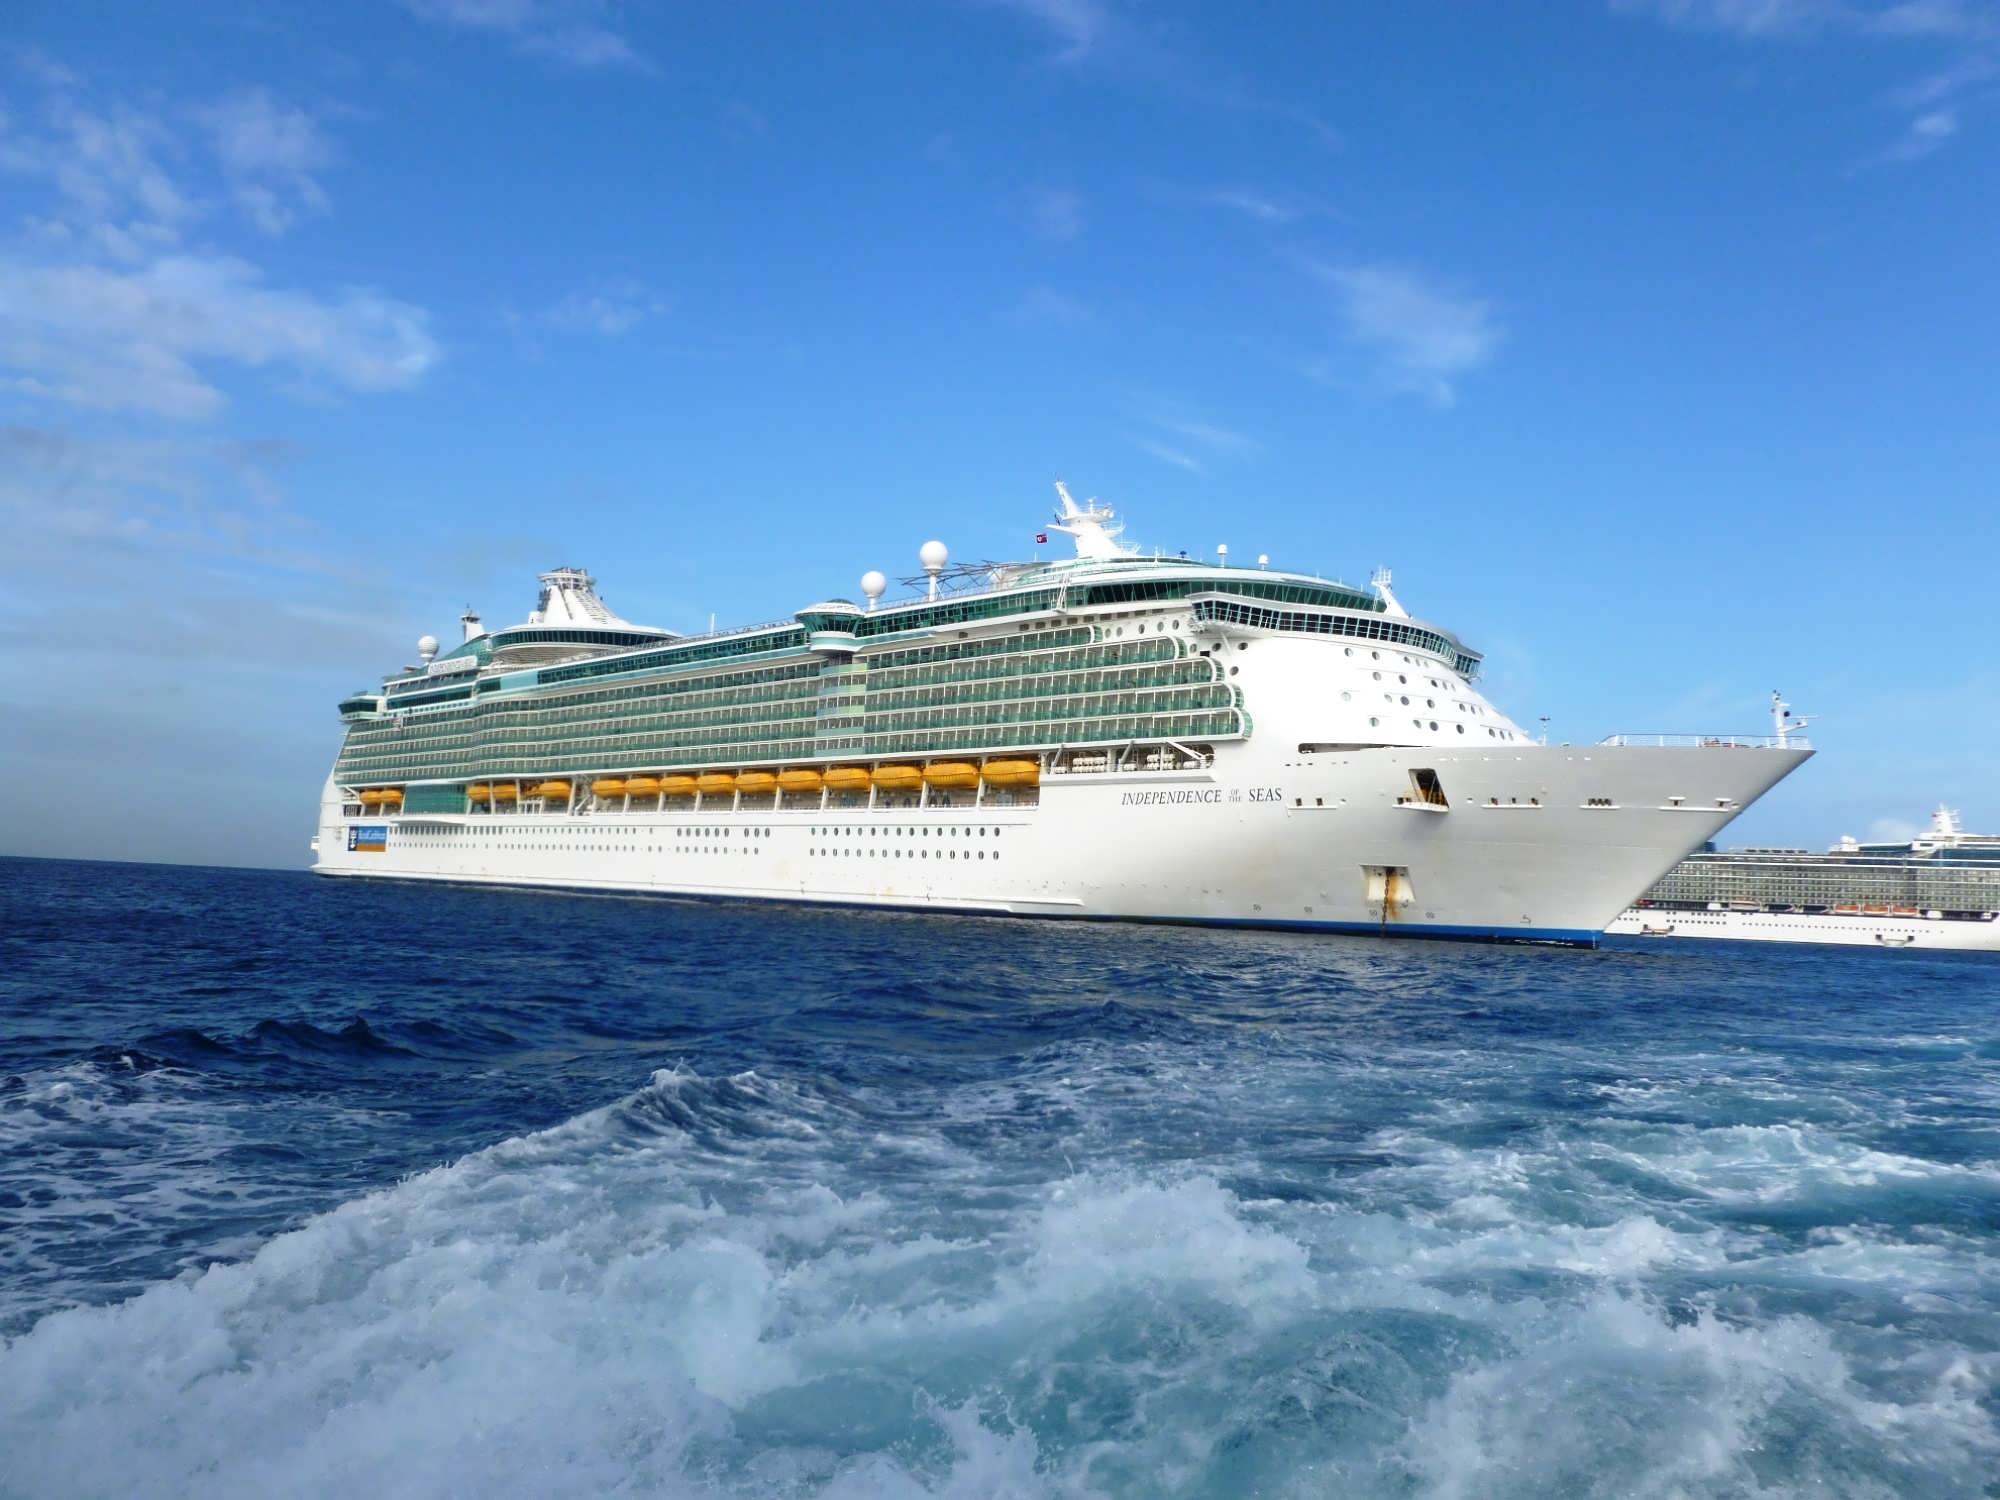 Royal Caribbean's Independence of the Seas.